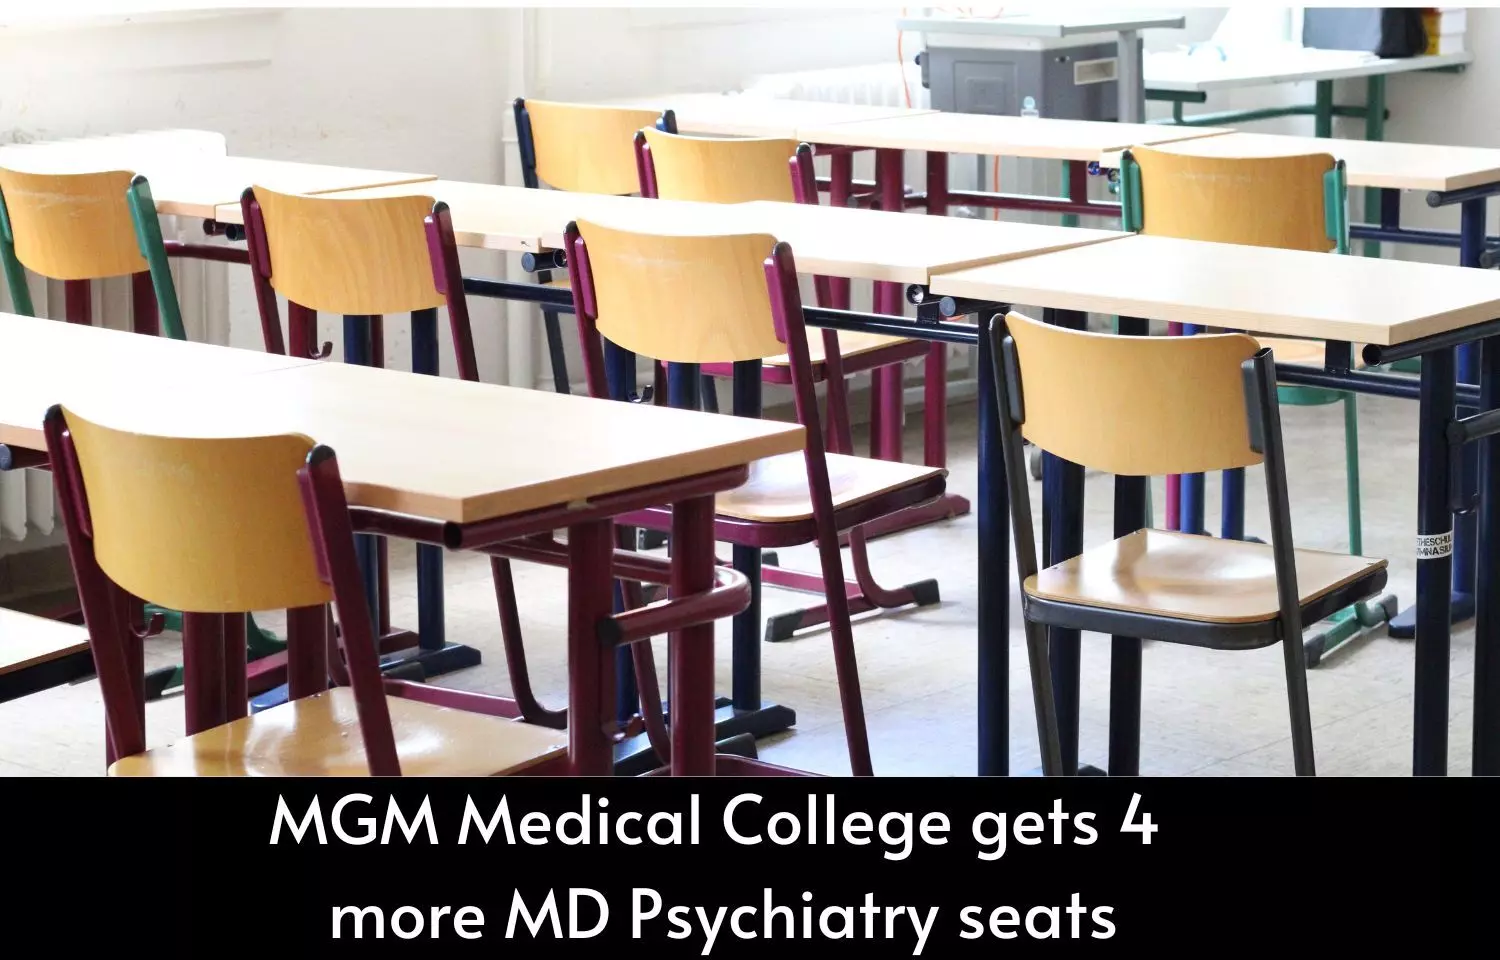 NMC gives nod for adding 4 MD psychiatry seats at MGM medical college